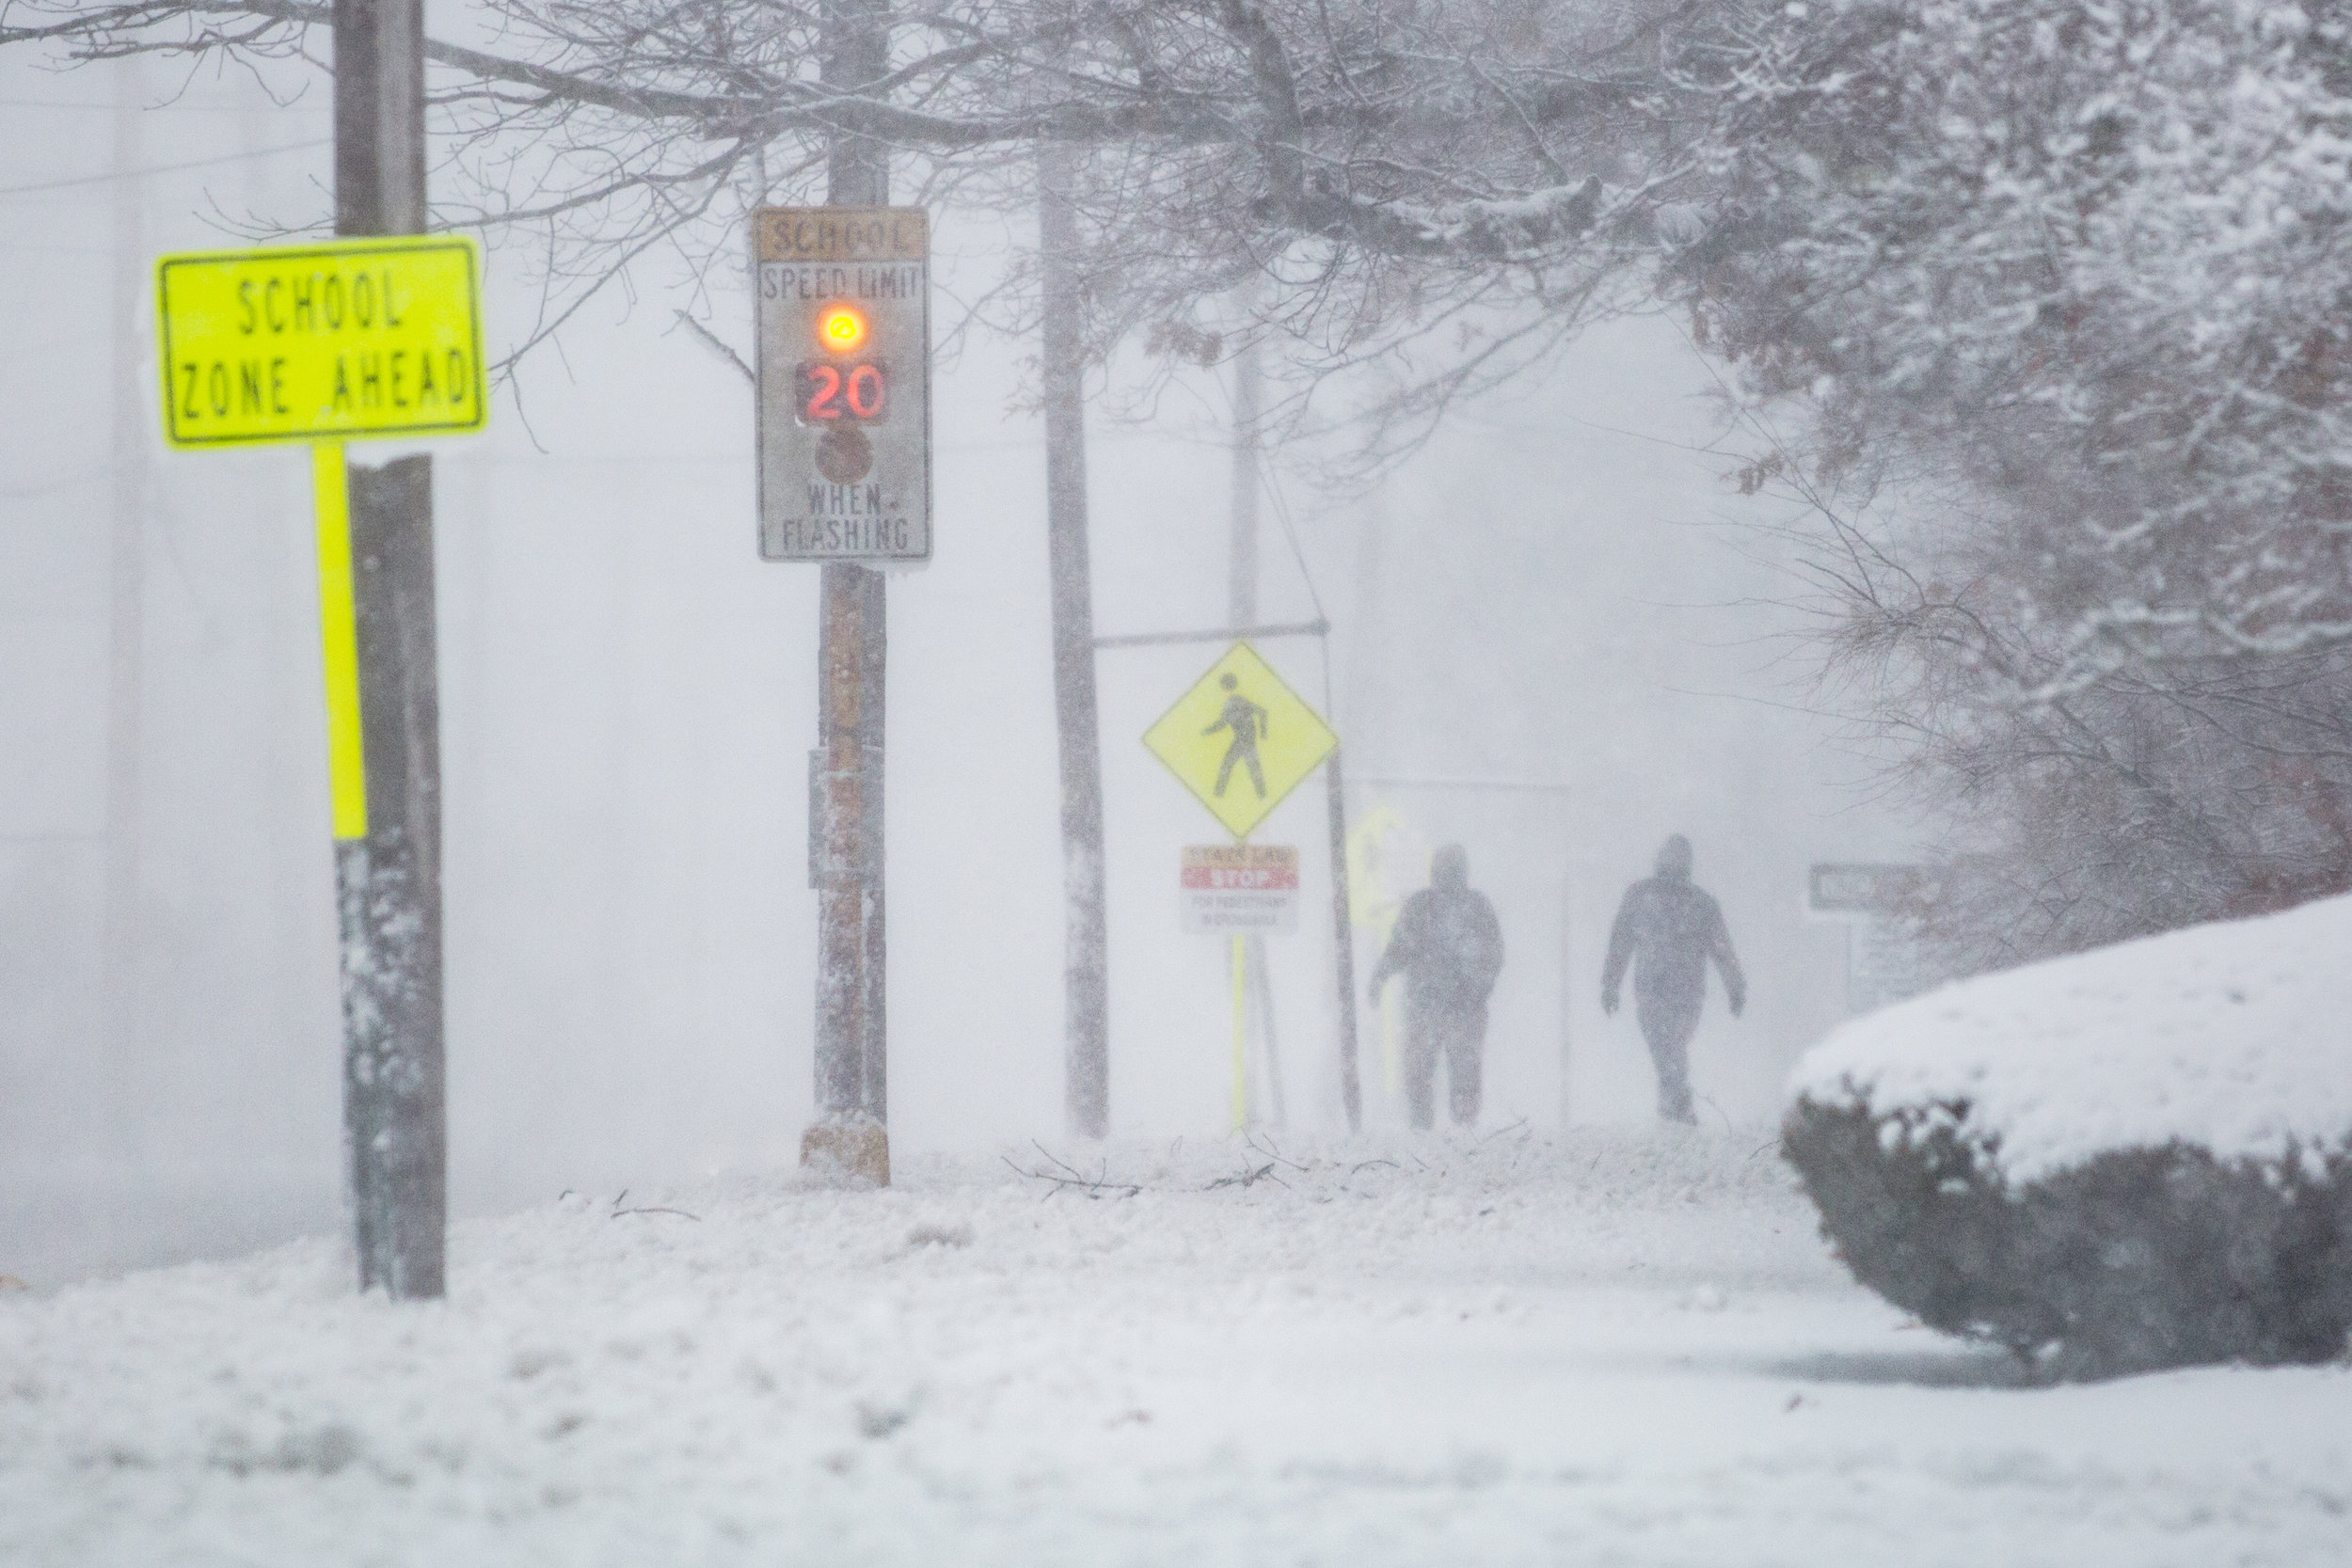  Two brave souls walk along Dartmouth Street during the blizzard. - South Dartmouth, MA 